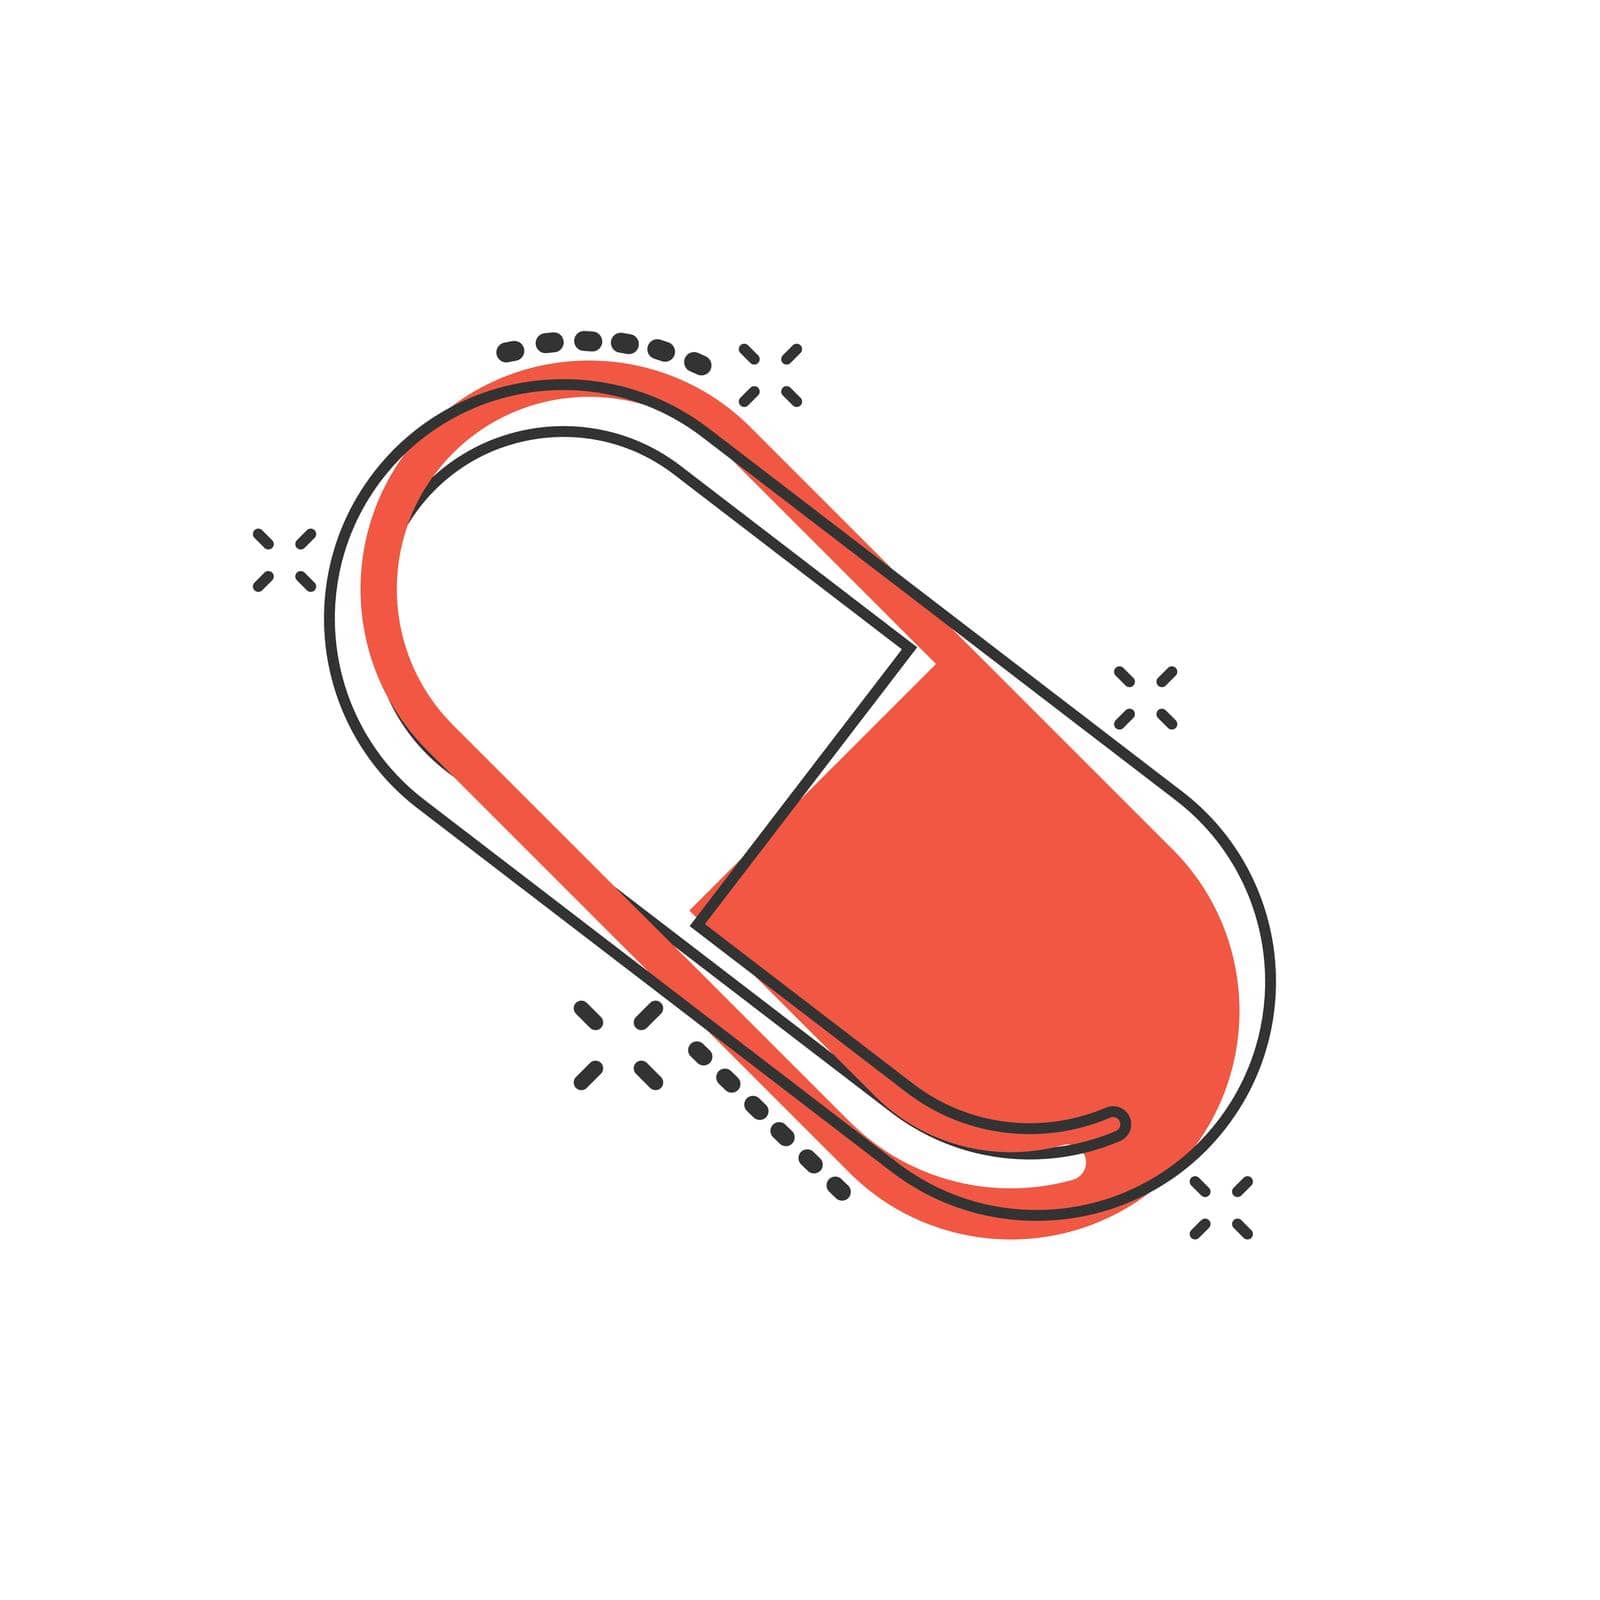 Pill capsule icon in comic style. Drugs cartoon vector illustration on white isolated background. Pharmacy splash effect business concept. by LysenkoA